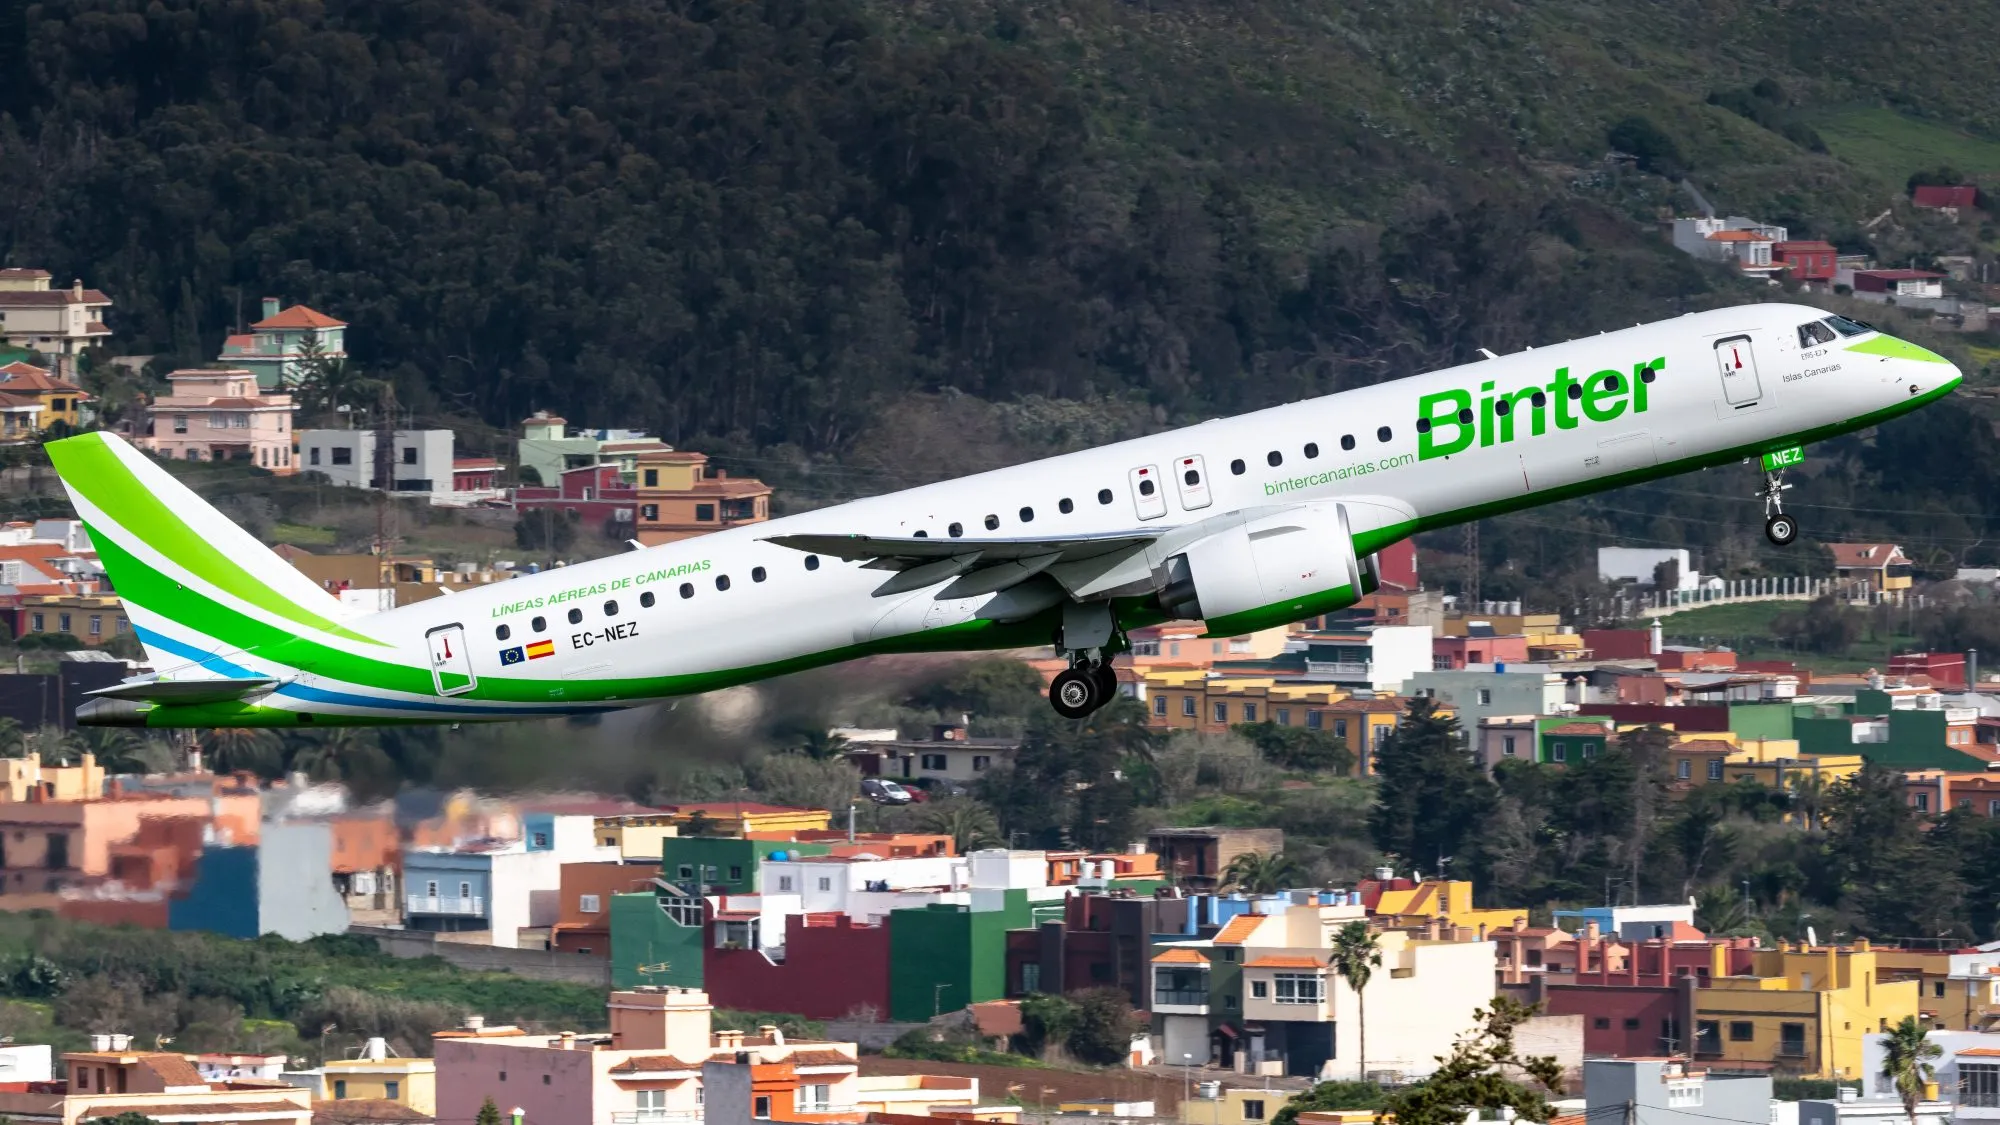 Spanish carrier Binter to connect Gran Canaria to Guelmim